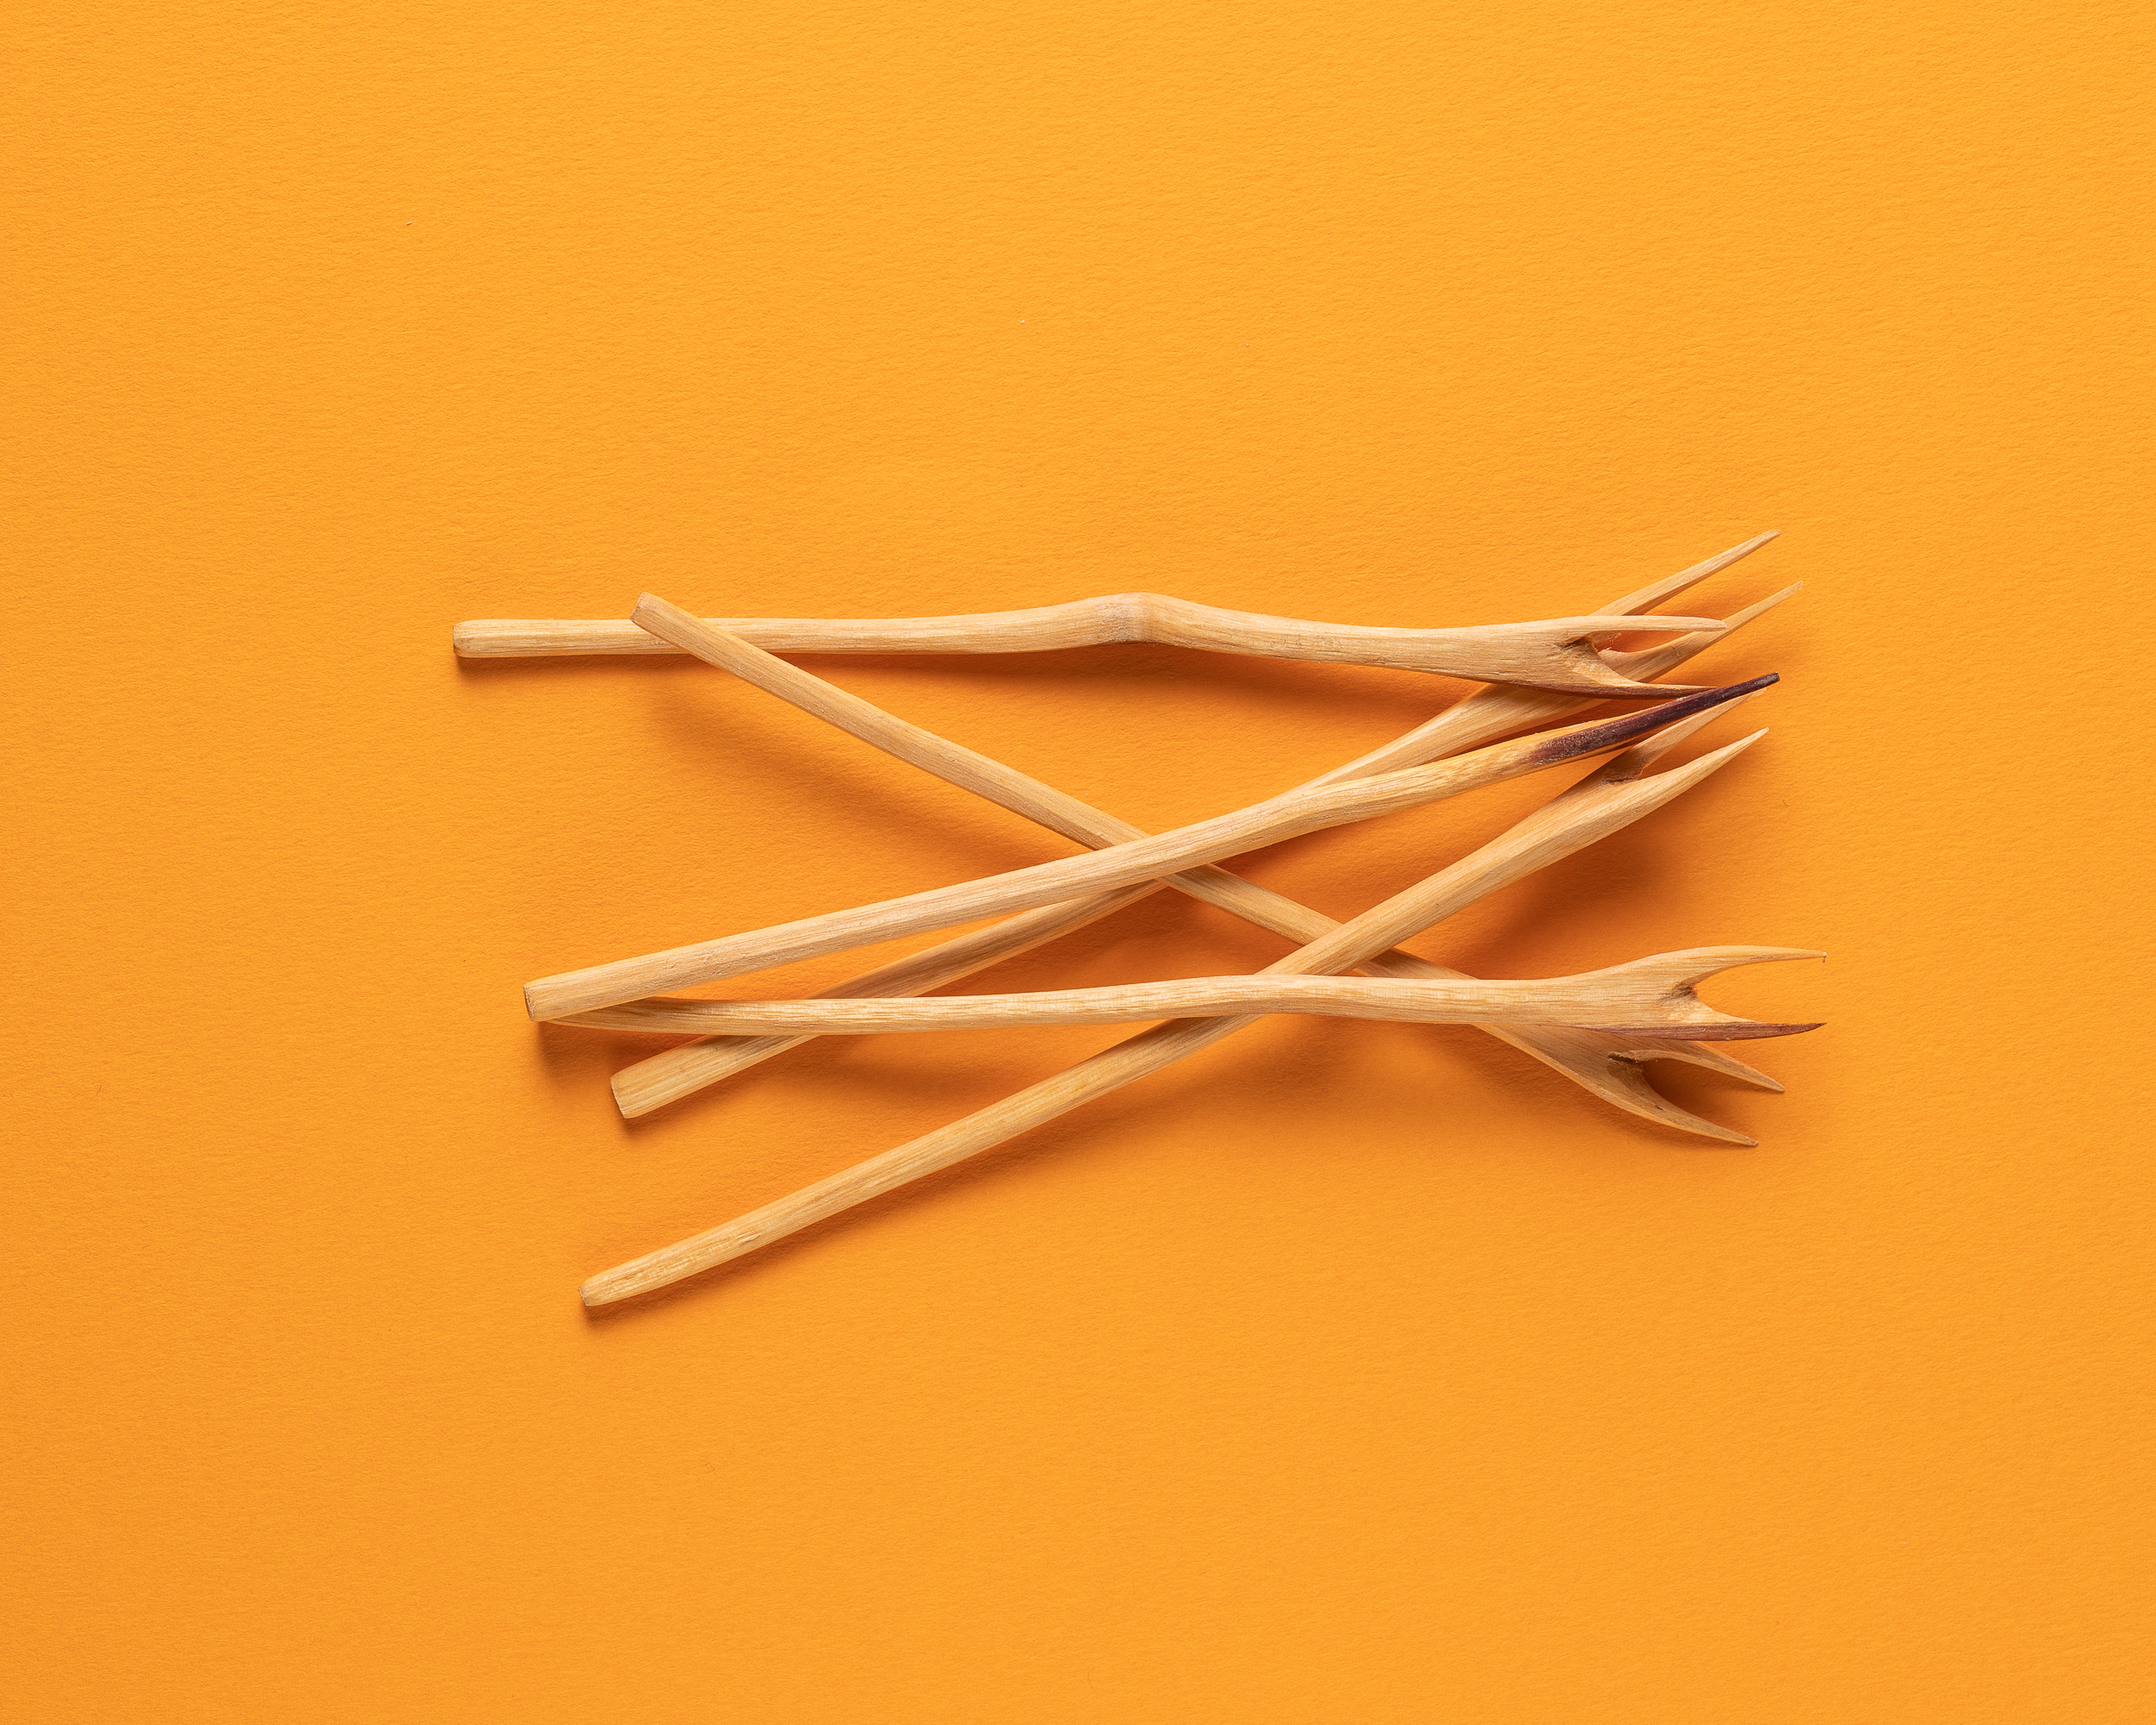 Wooden forks on yellow by Jose Barrios